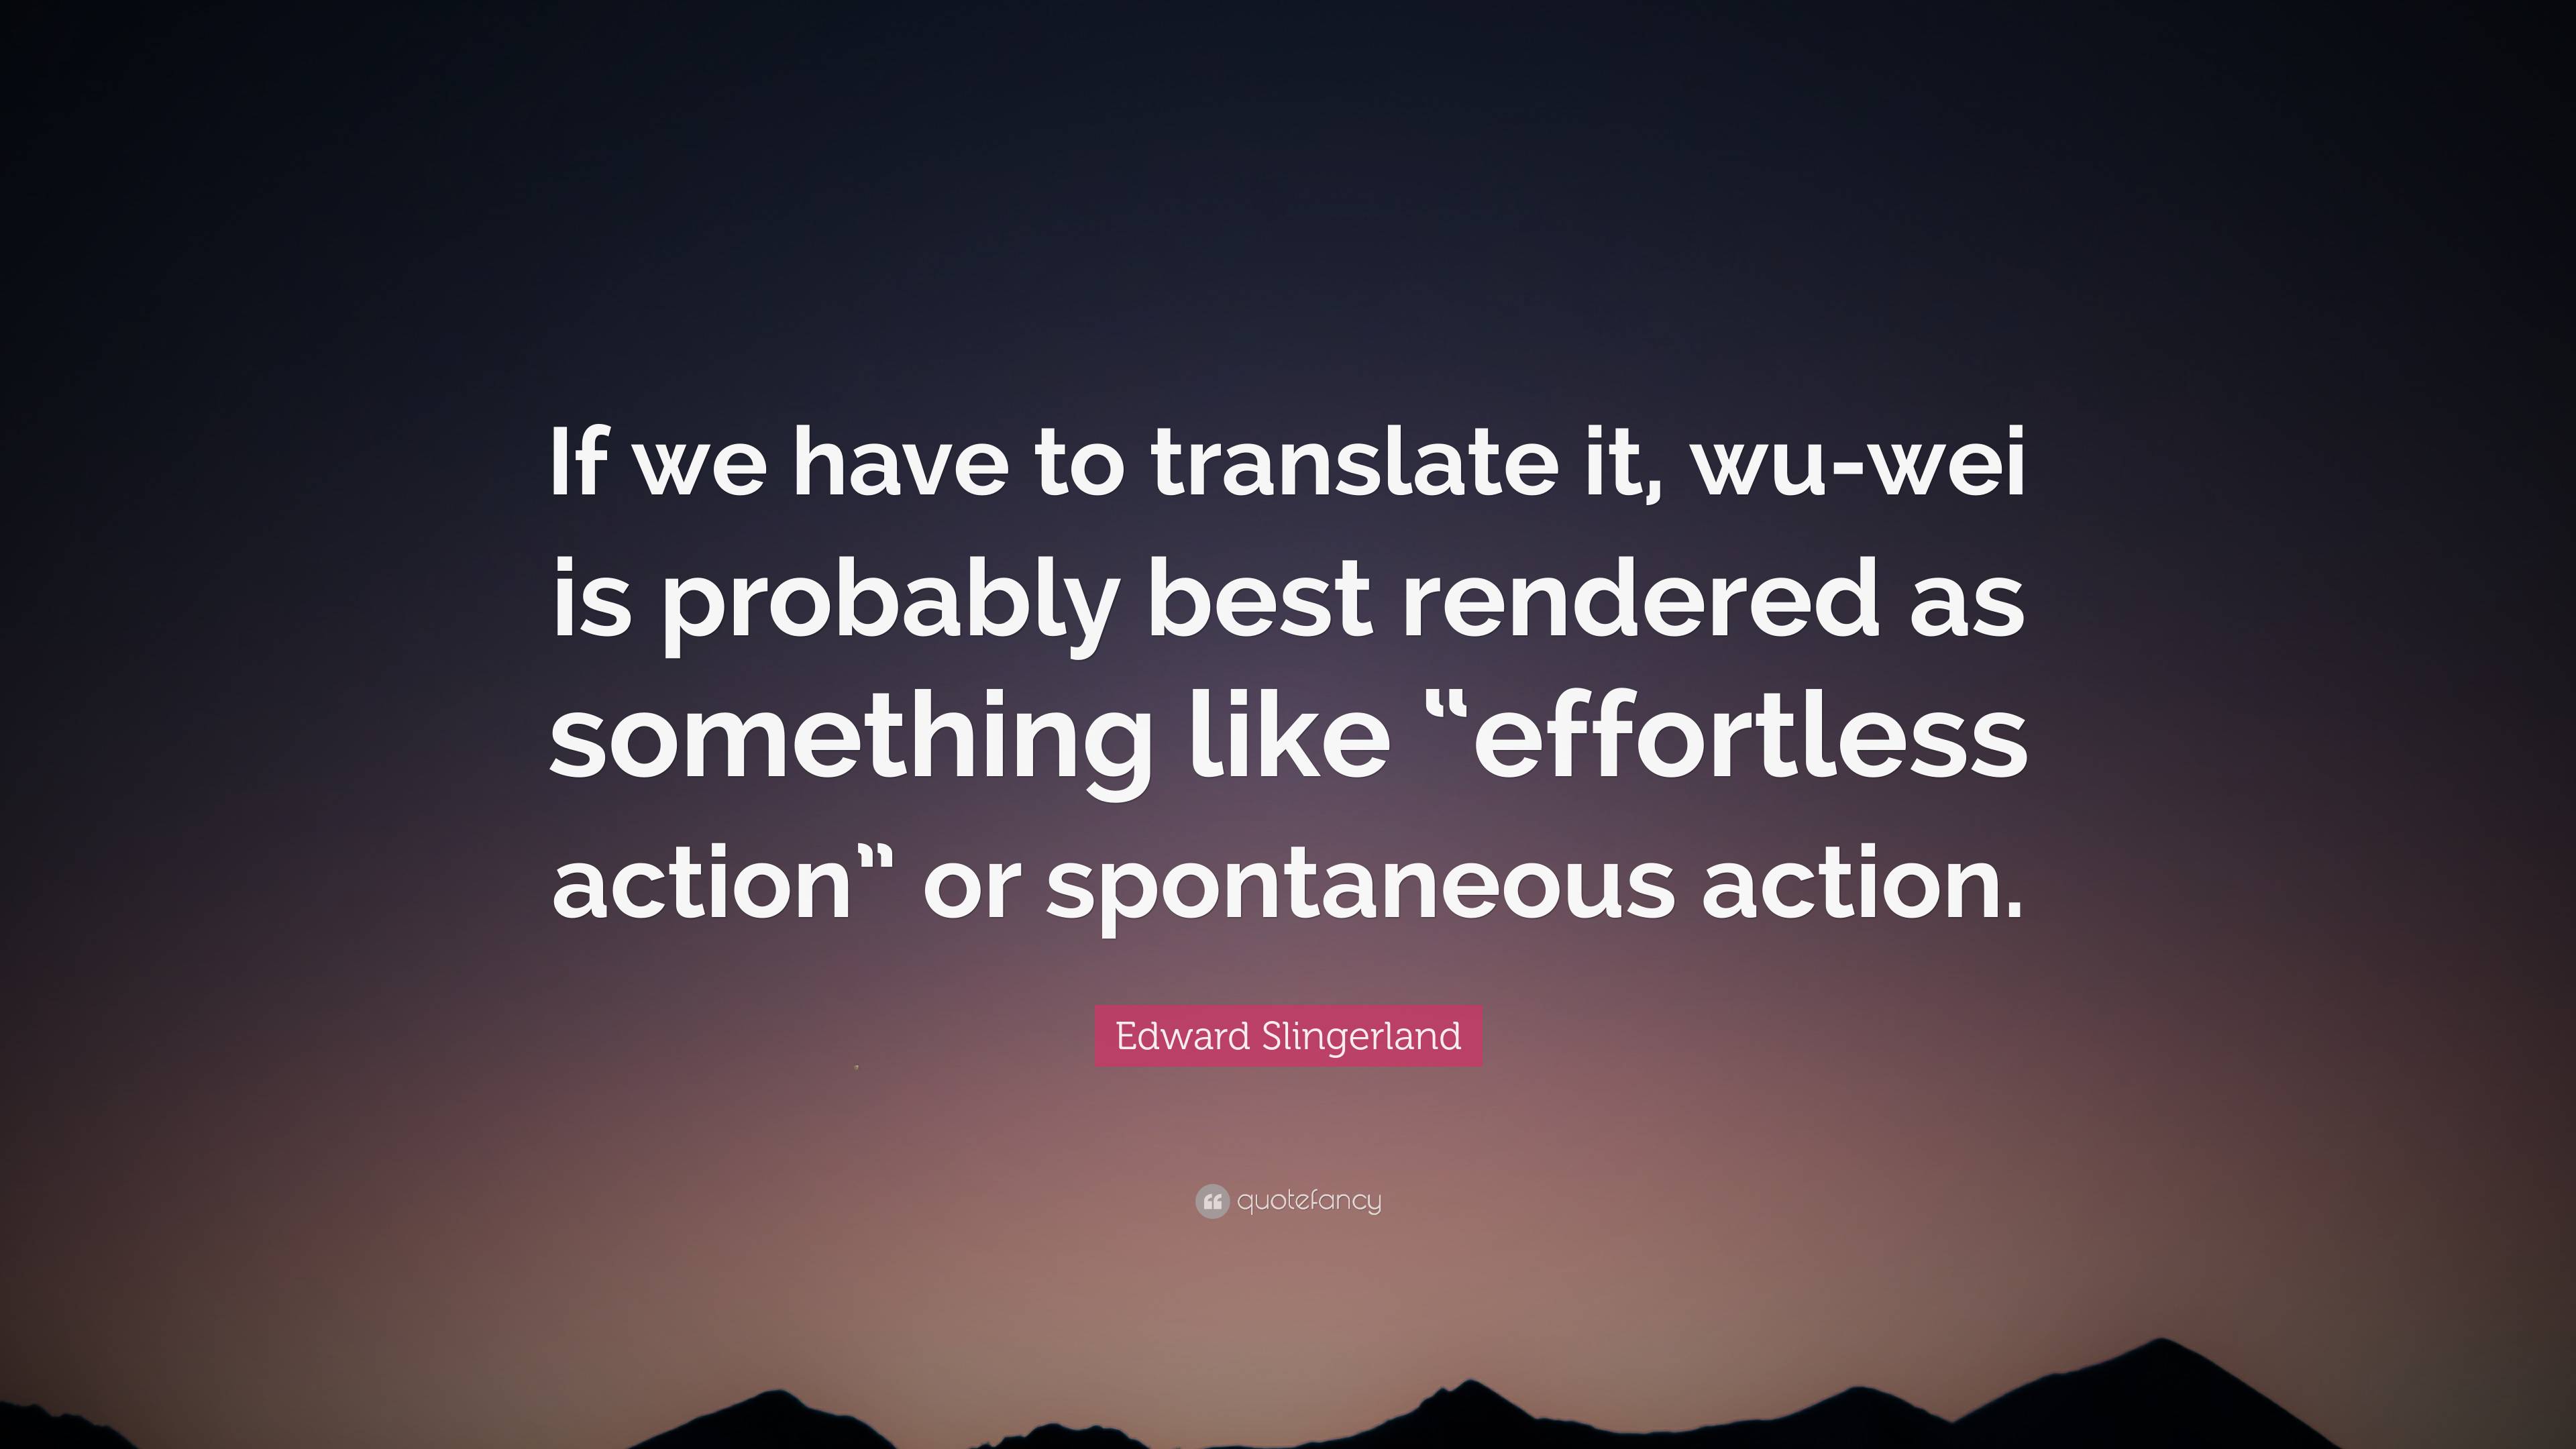 https://quotefancy.com/media/wallpaper/3840x2160/7533993-Edward-Slingerland-Quote-If-we-have-to-translate-it-wu-wei-is.jpg